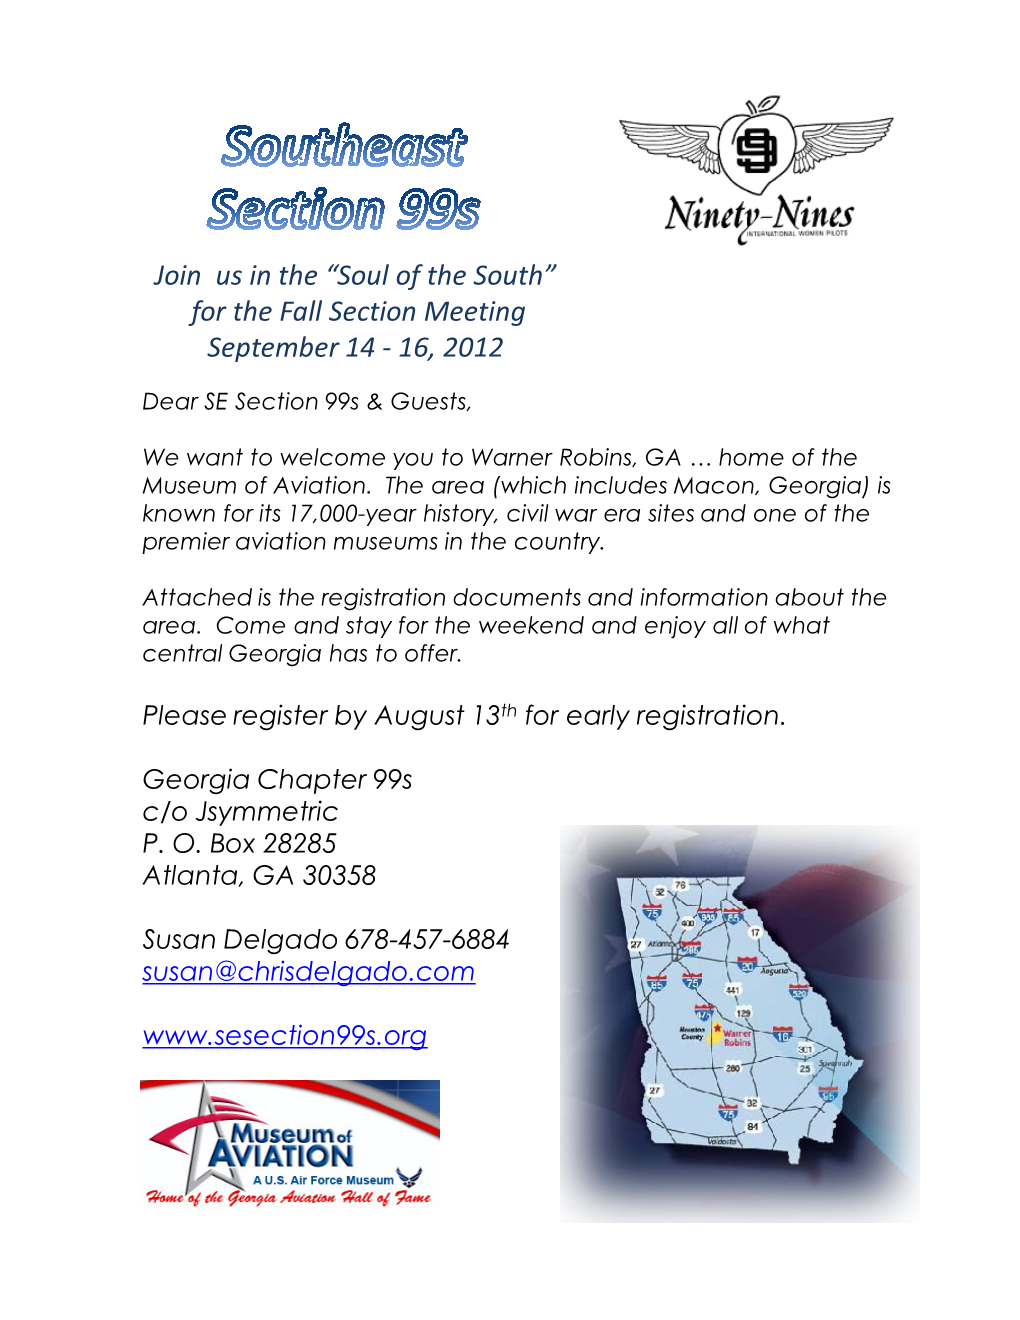 For the Fall Section Meeting September 14 - 16, 2012